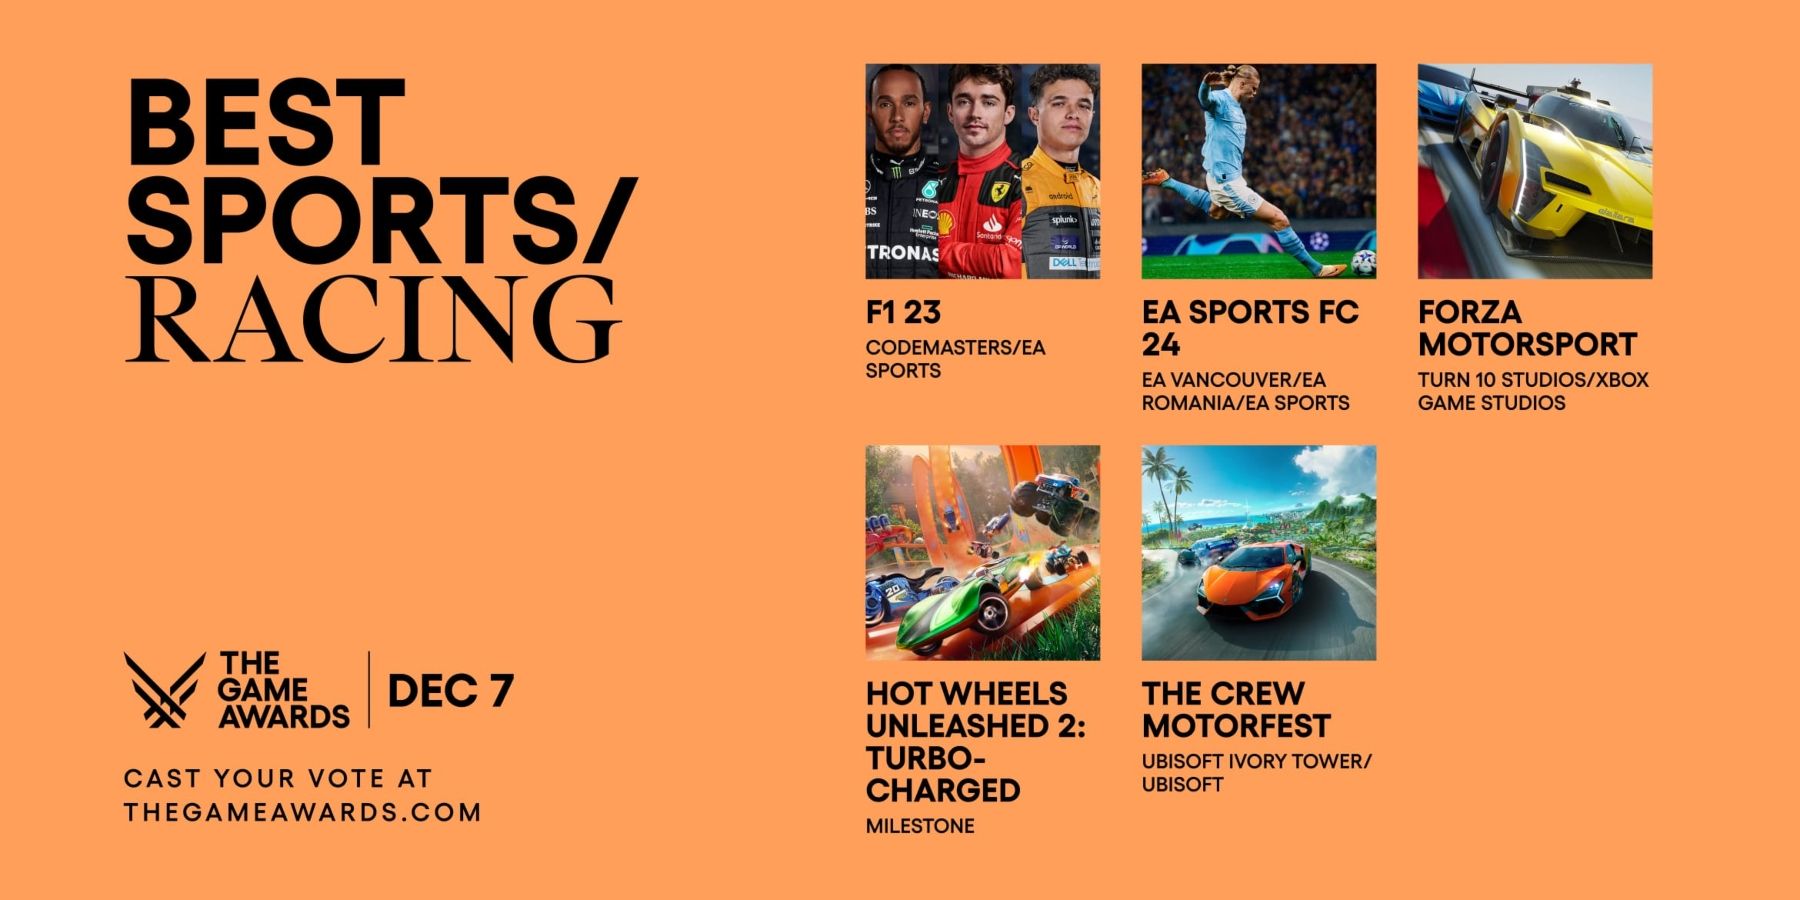 Gran Turismo 7 Wins “Best Sports / Racing Game” at The Game Awards